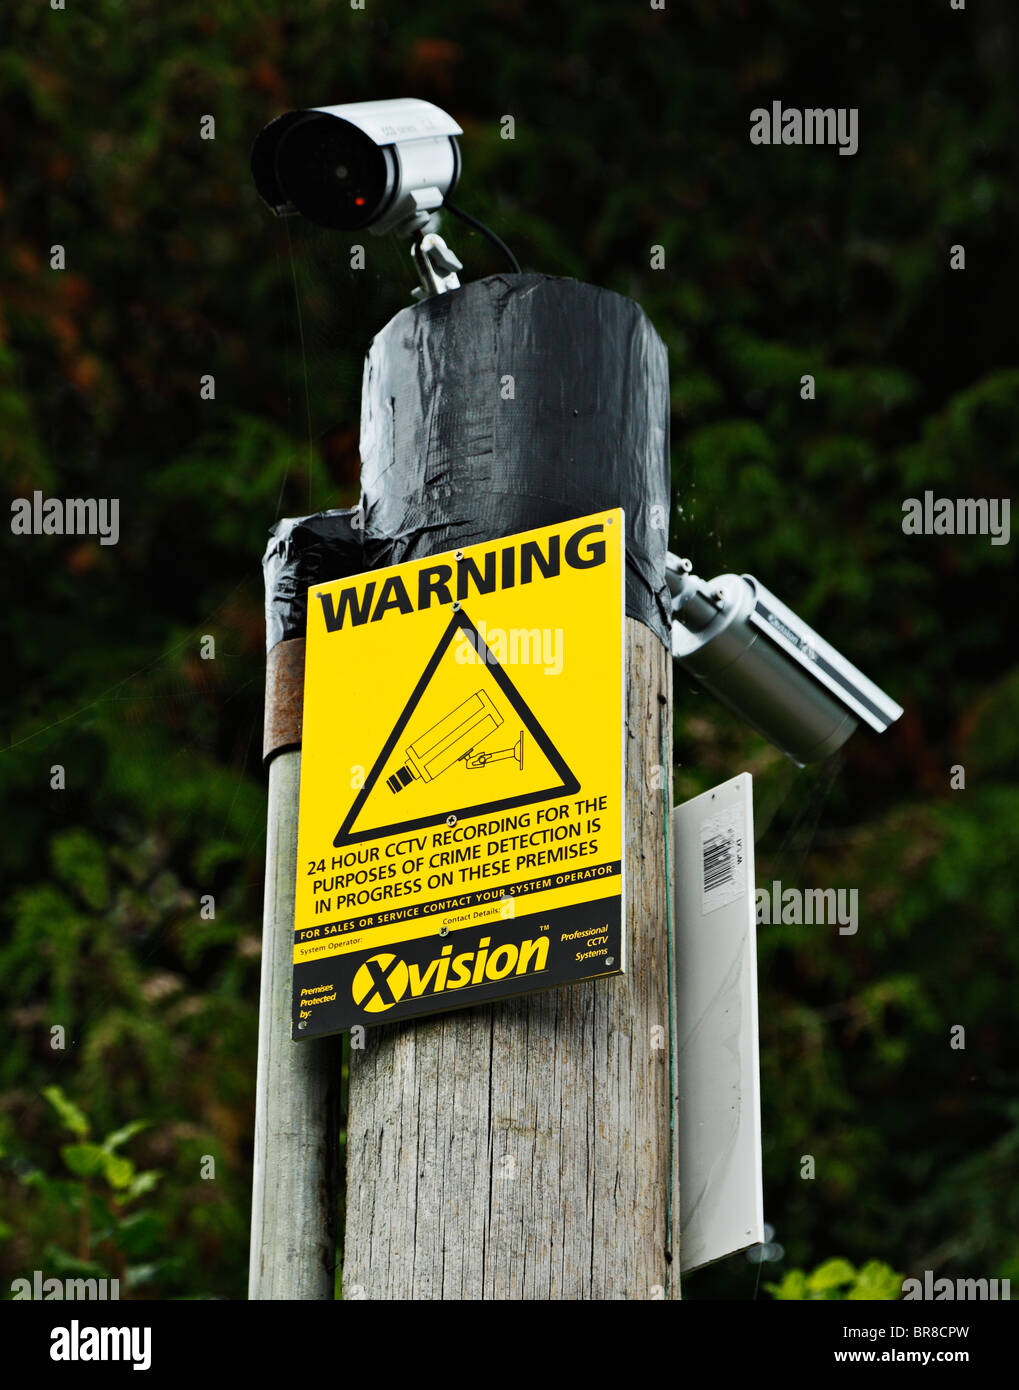 Private security cameras & warning notice. Stock Photo